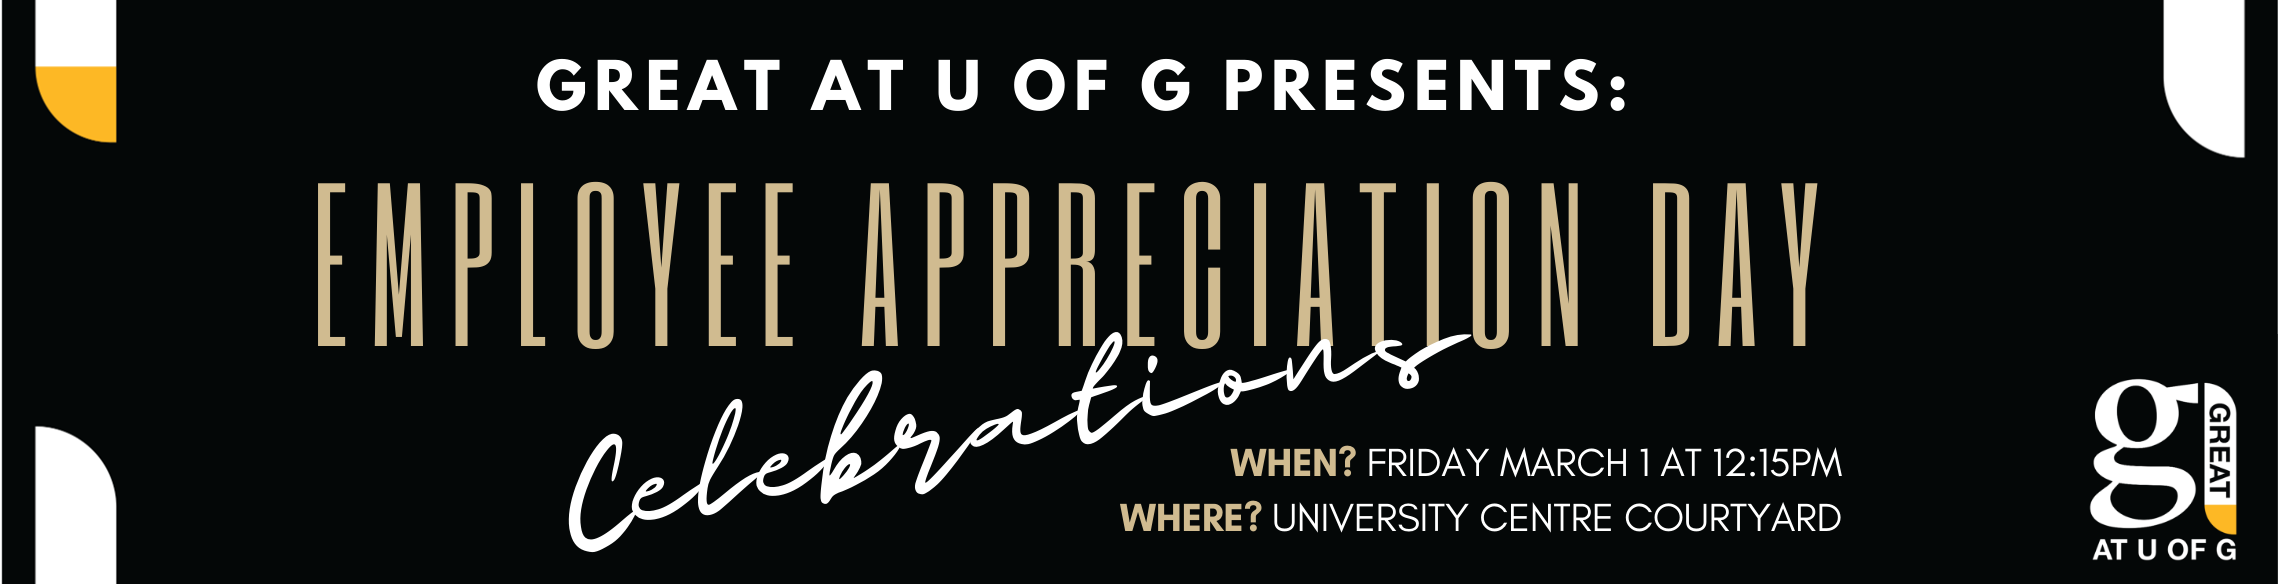 GREAT at U of G Presents: Employee Appreciation Day Celebrations. When? Friday March 1st at 12:15 pm. Where? University Centre Courtyard